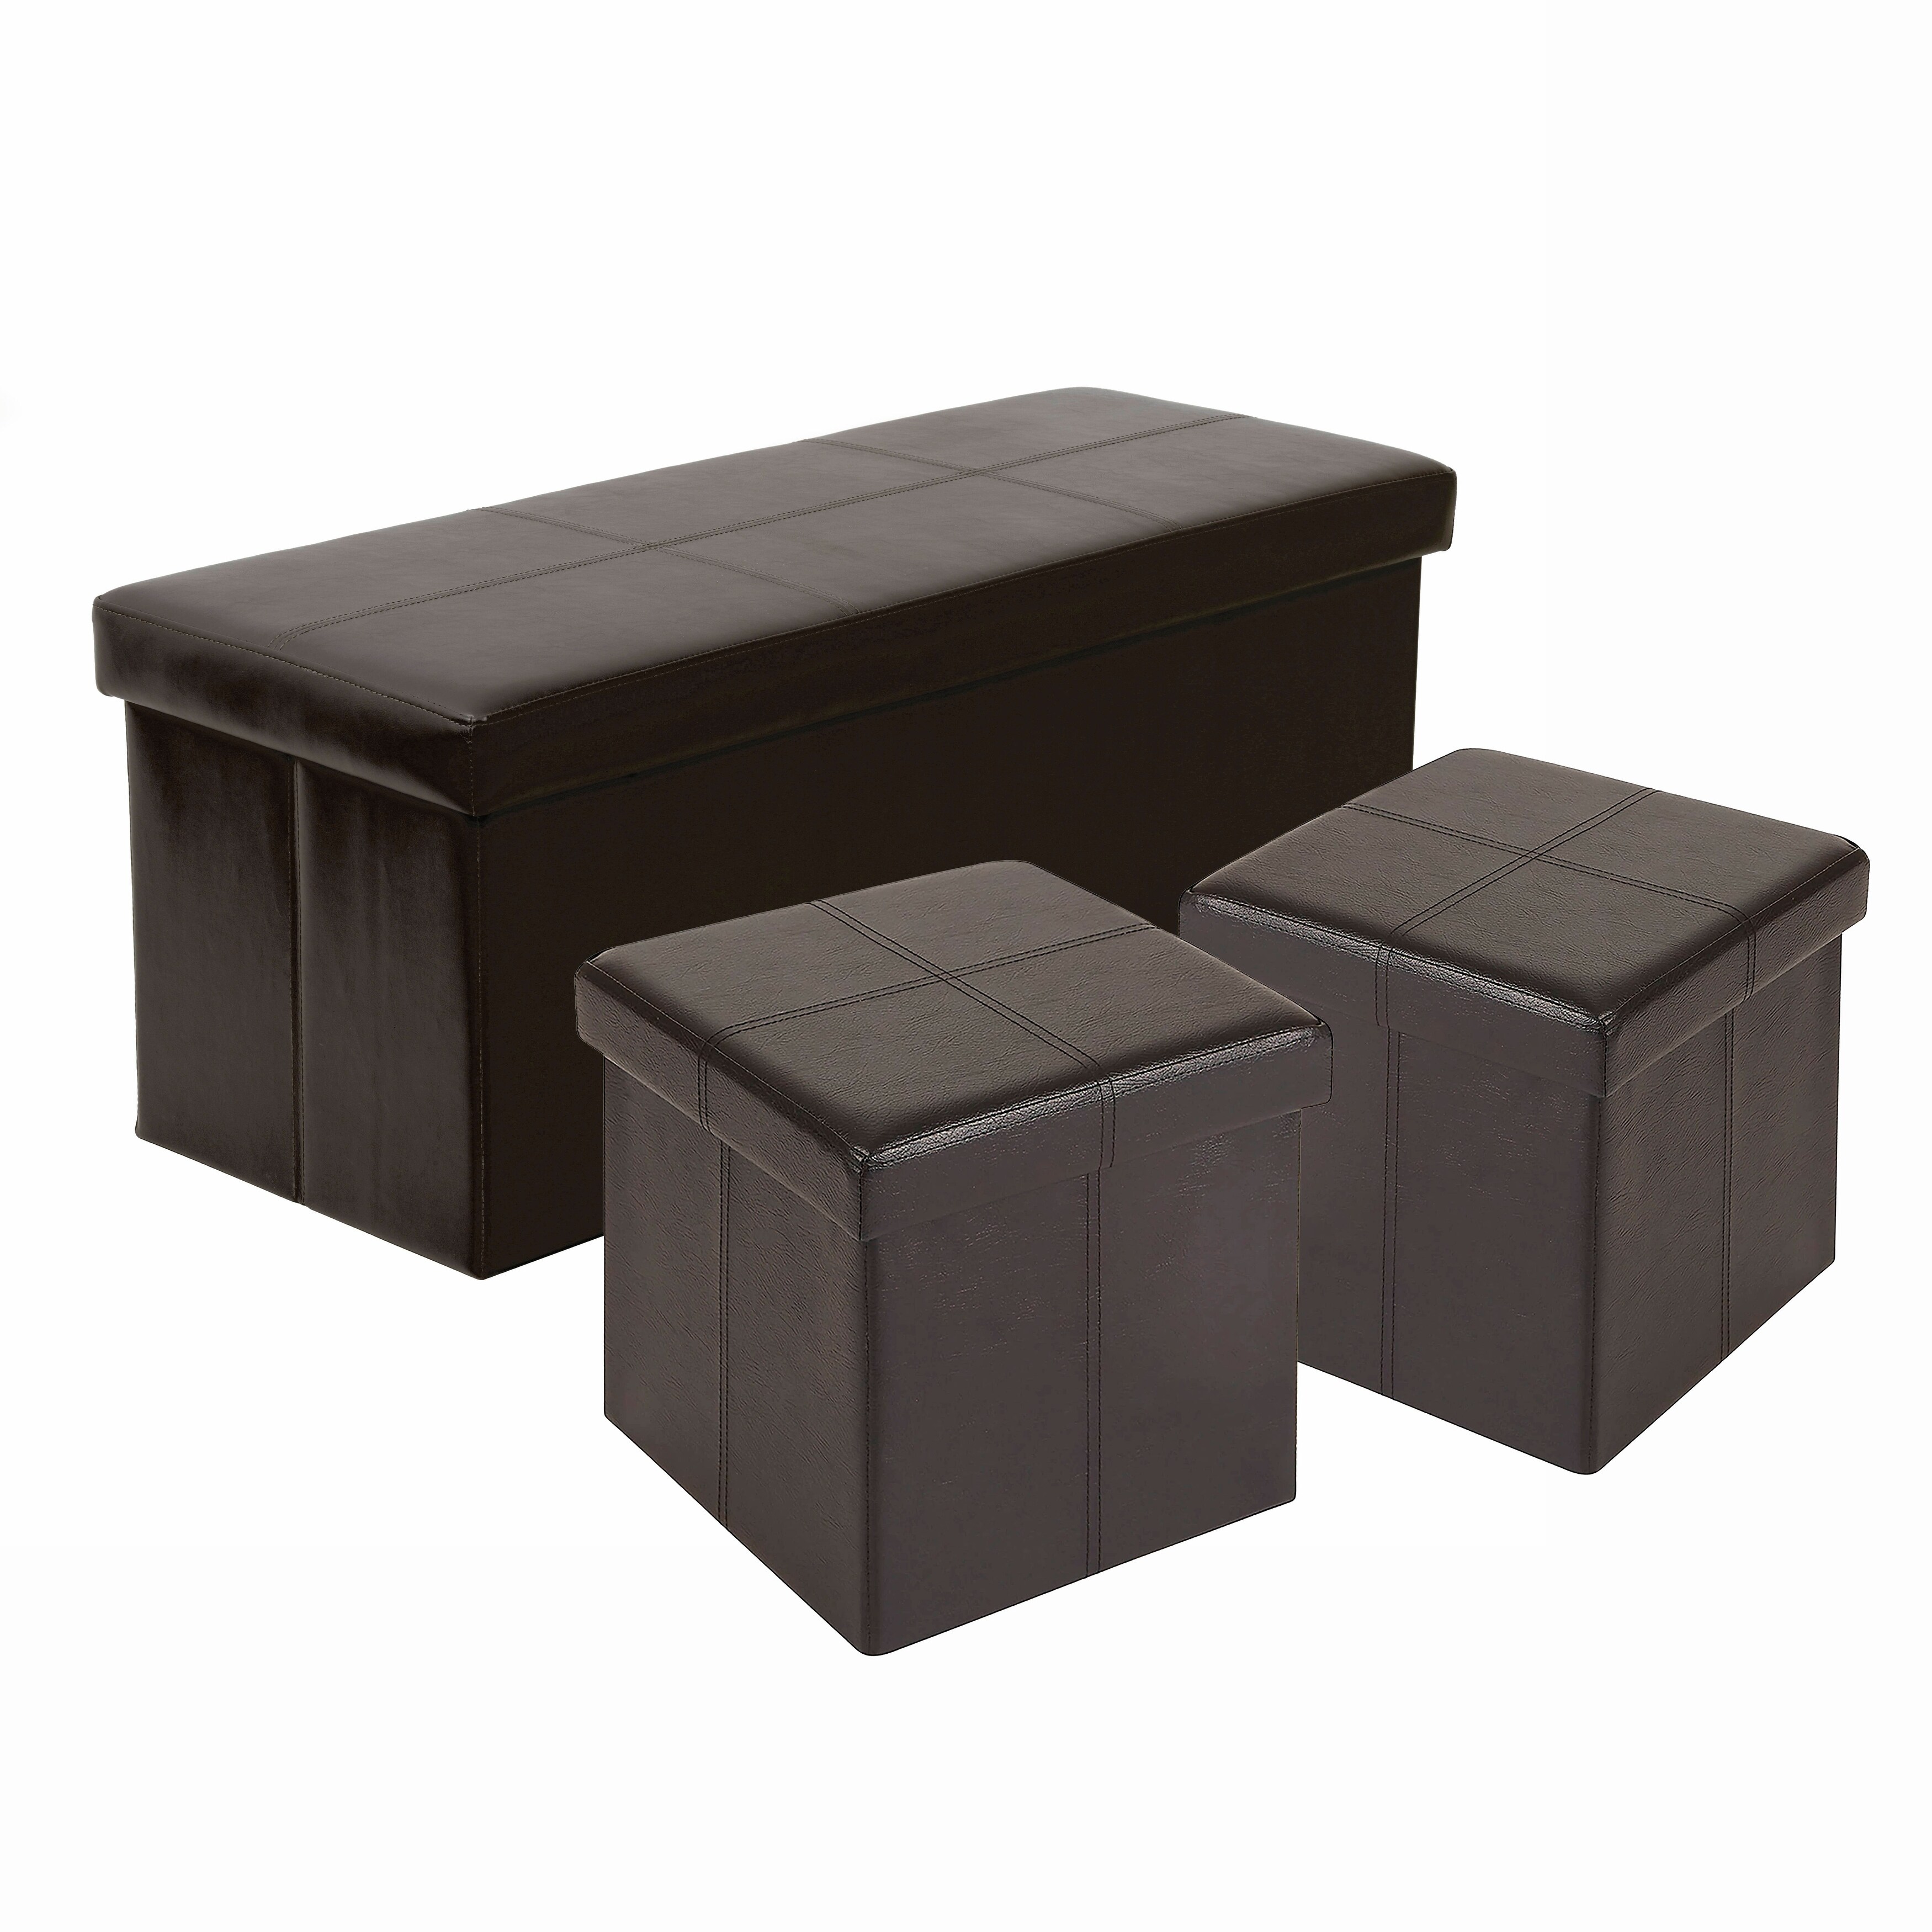 https://ak1.ostkcdn.com/images/products/is/images/direct/a0310152bf6cf272ea346f61d3665bf7b6f2209c/American-Furniture-Classics-Model-514-3-pc-Foldable-Tufted-Storage-Bench-and-2-Ottomans---Brown.jpg